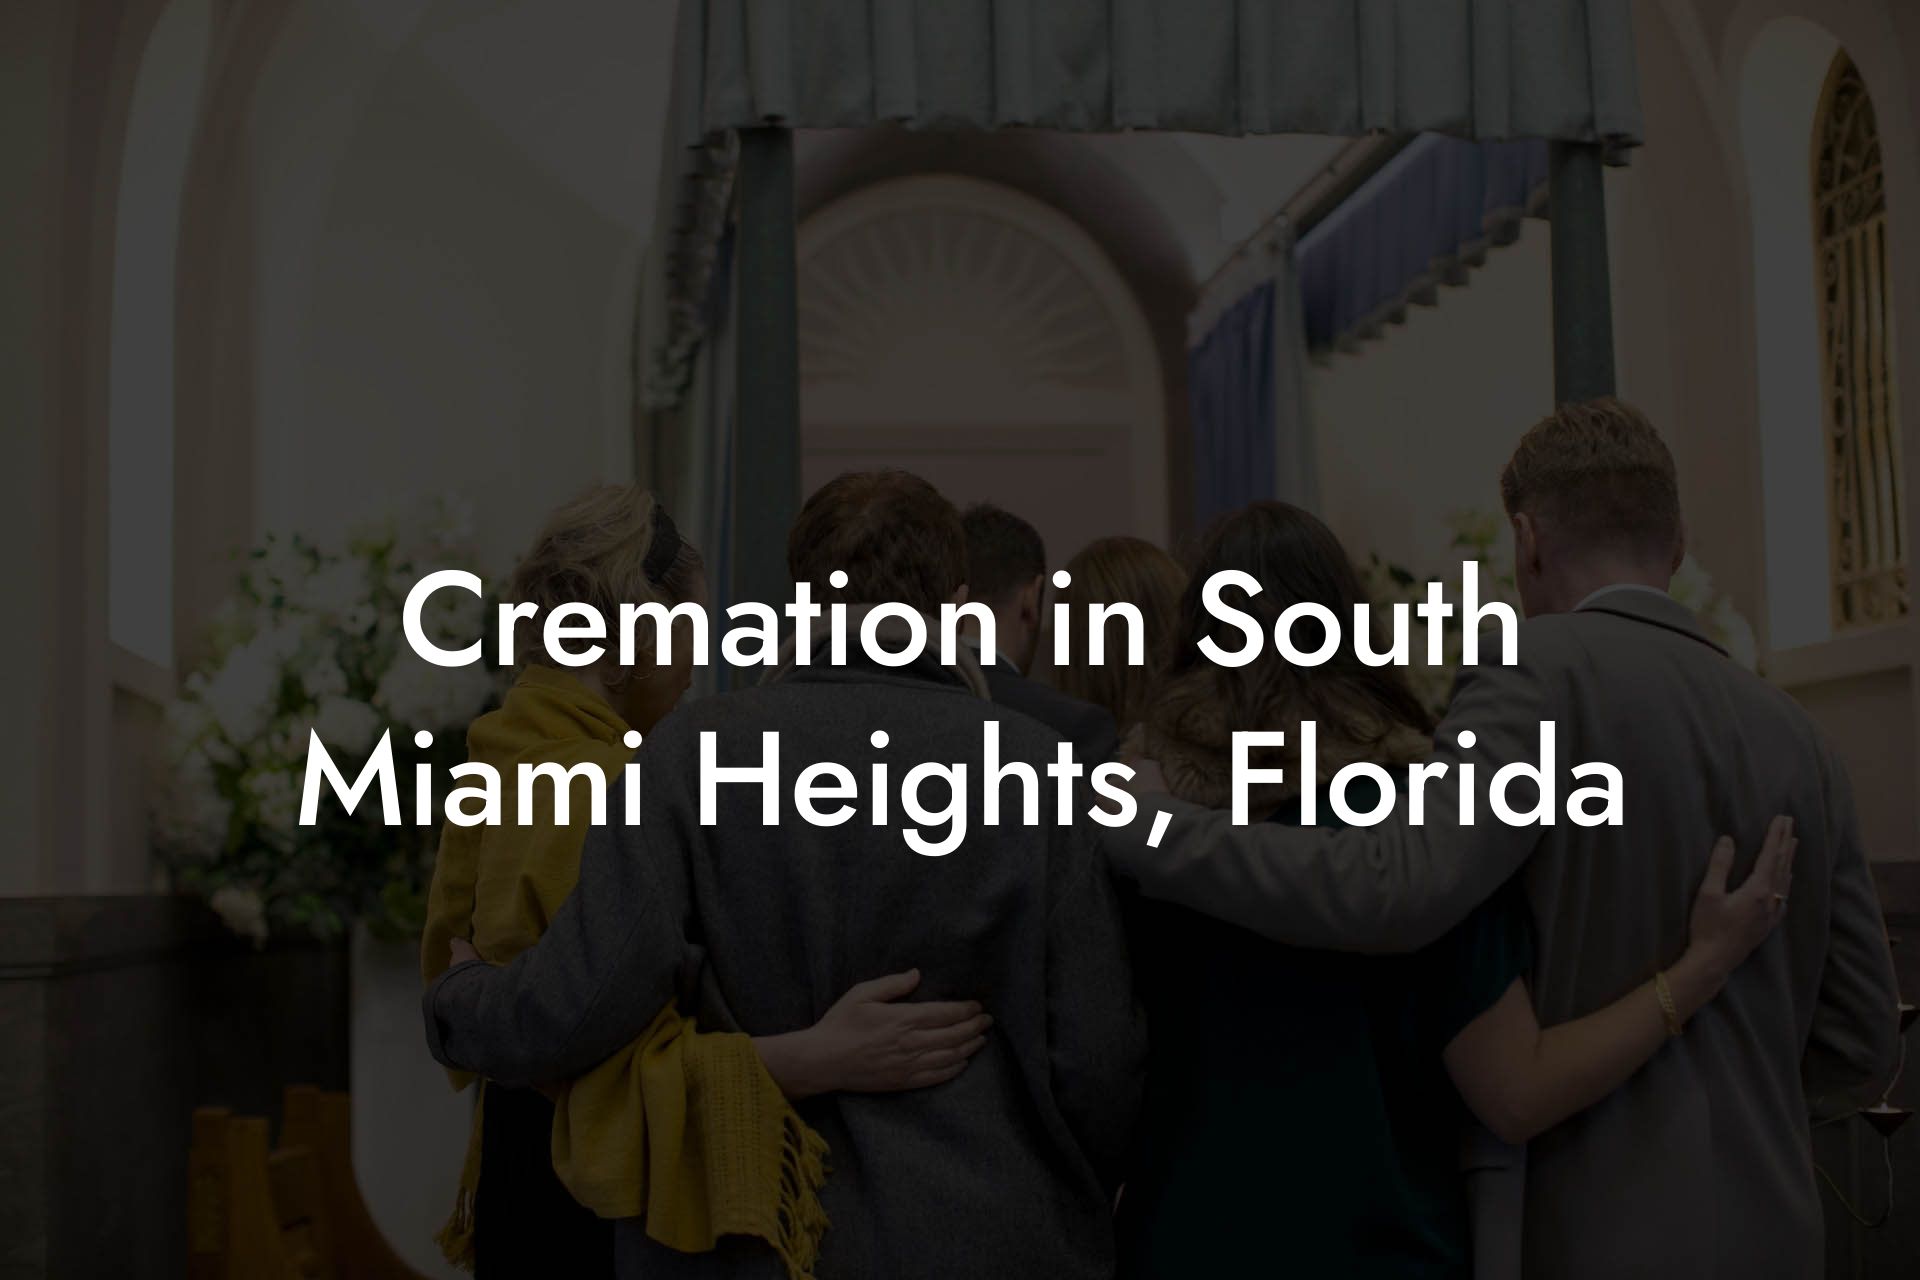 Cremation in South Miami Heights, Florida